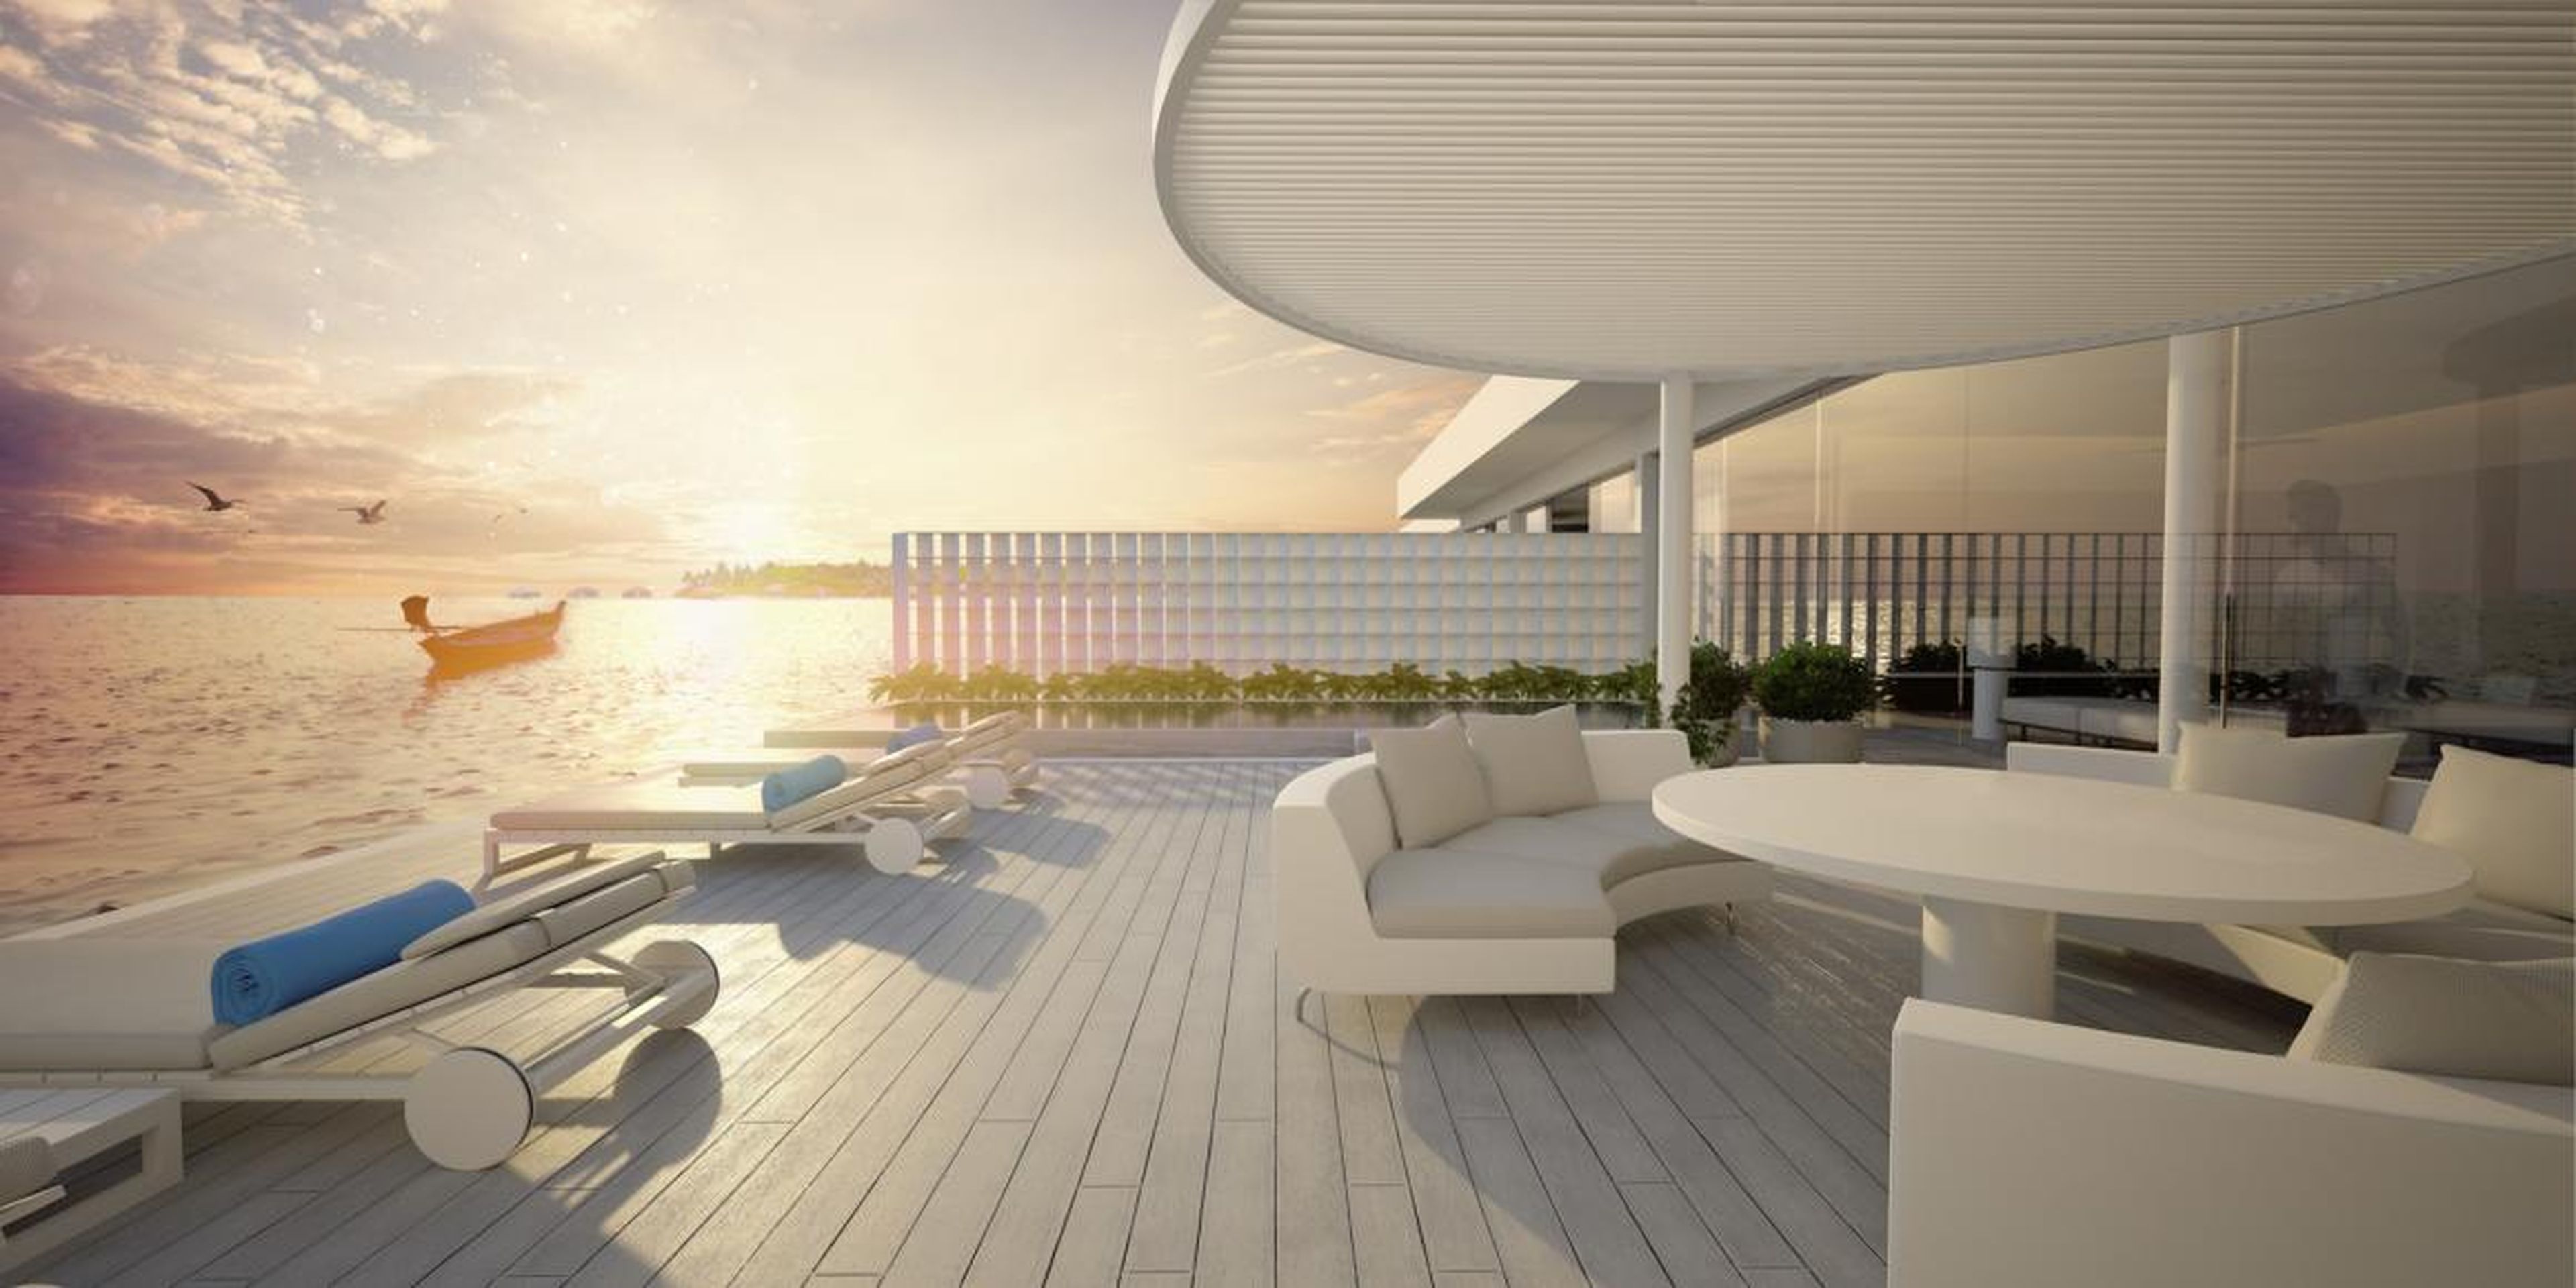 Apart from the integrated space for living, dining, entertaining, and sleeping on the upper level, there's also a deck prime for sunset watching, complete with an infinity-edge pool.